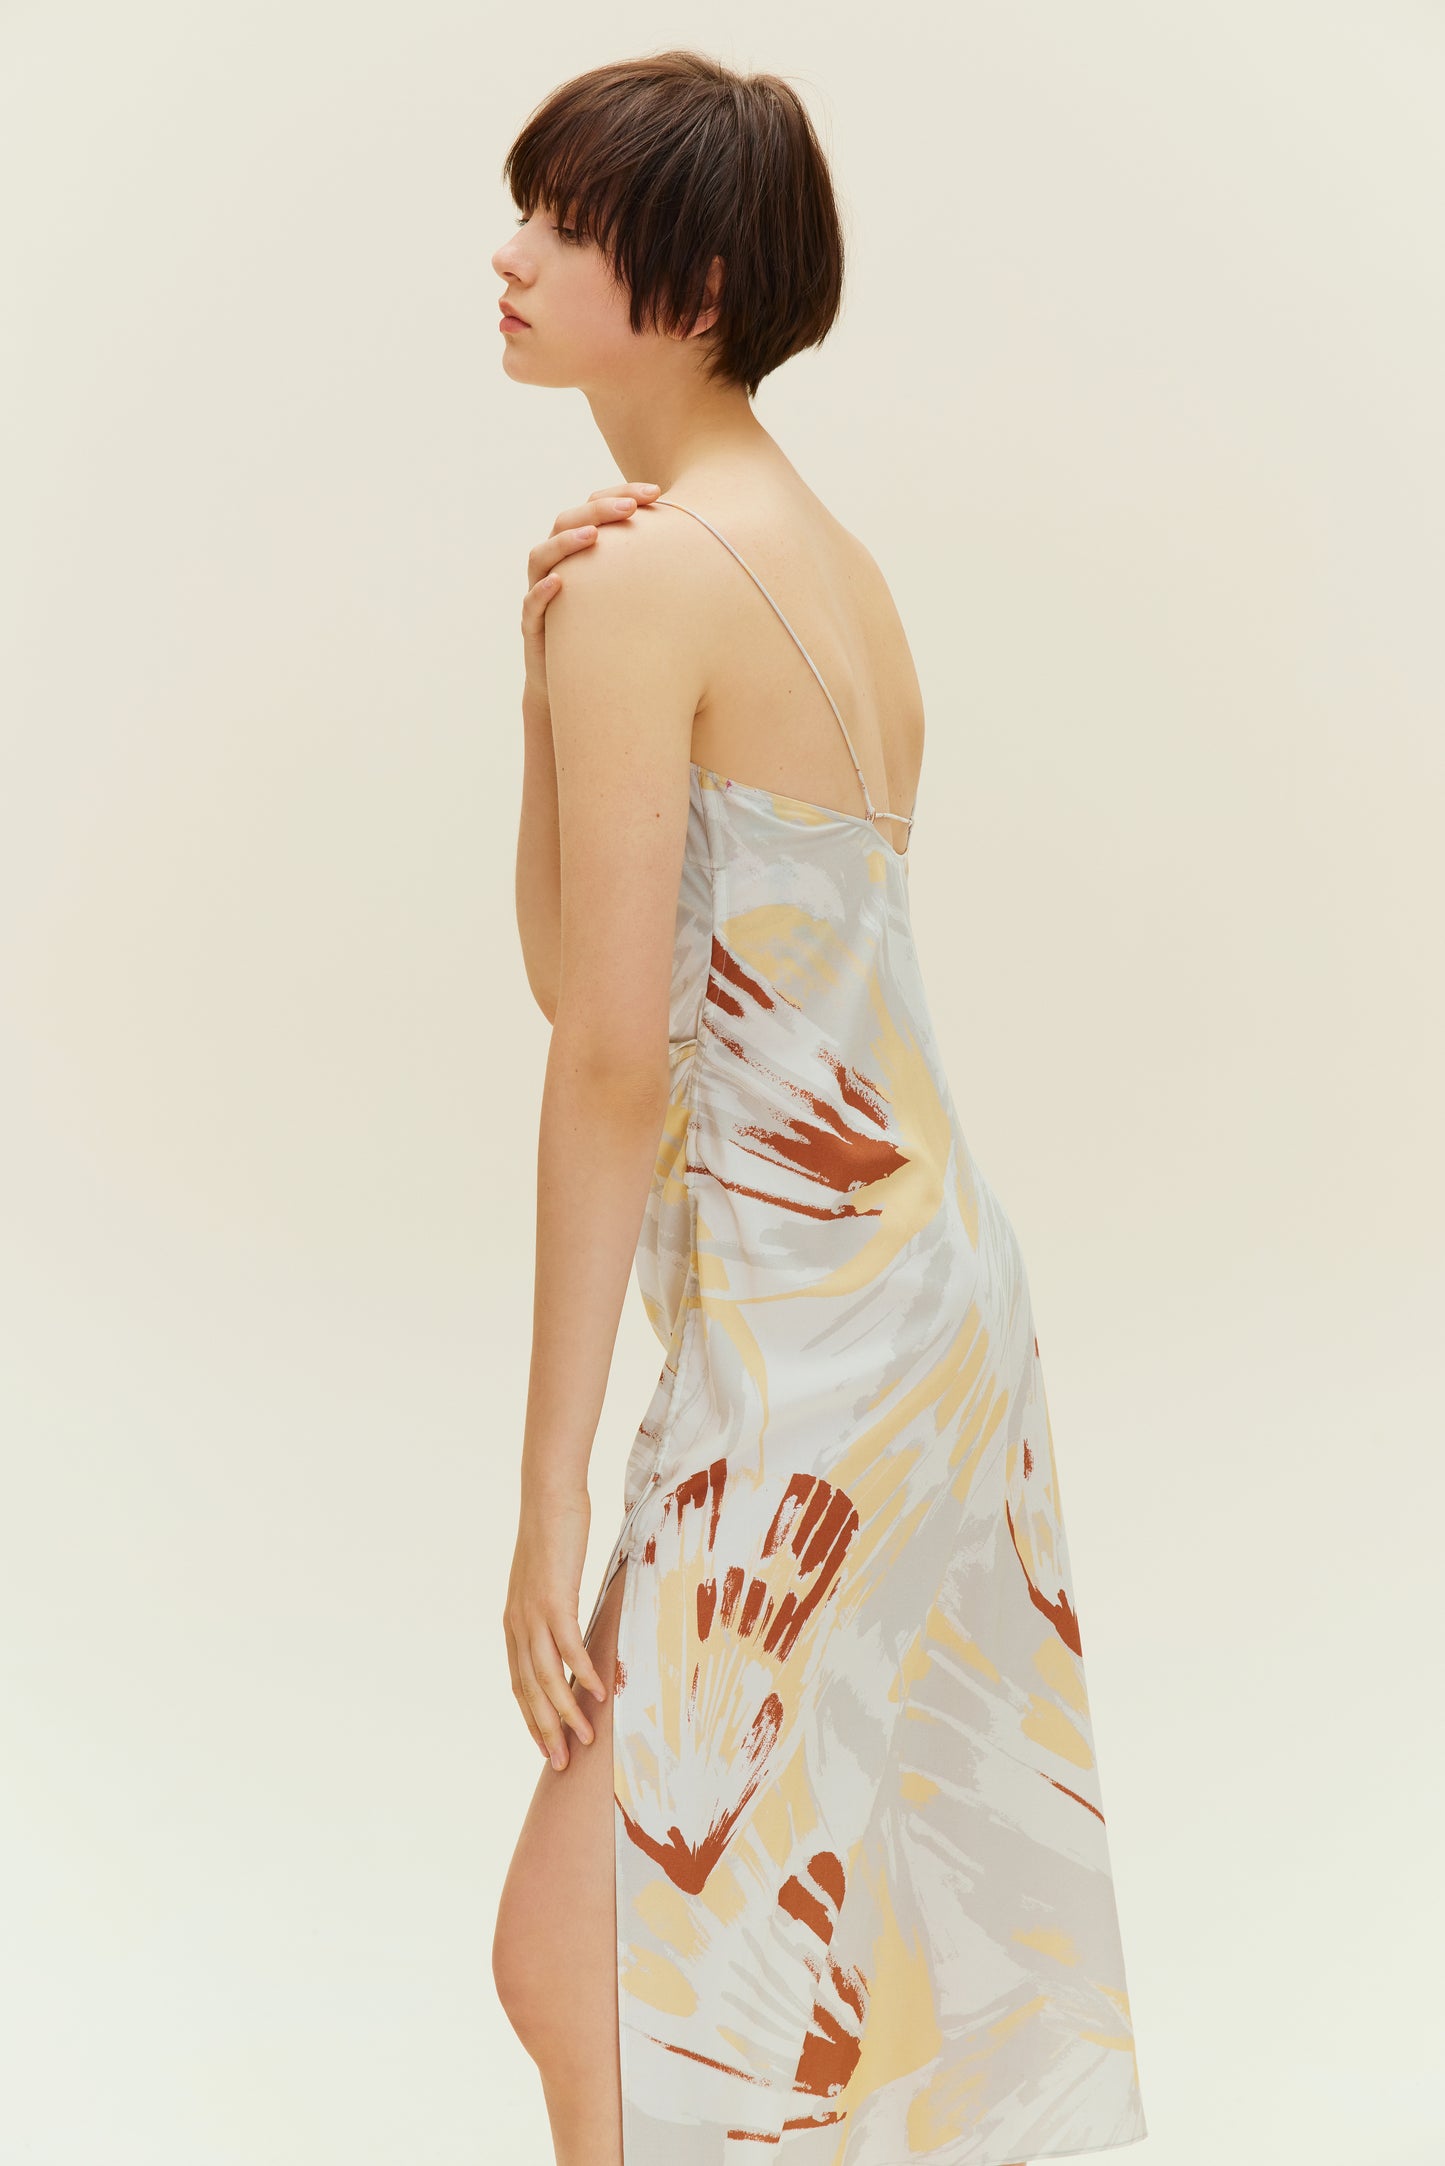 Side view of woman wearing spaghetti strap dress with brown, beige, white print